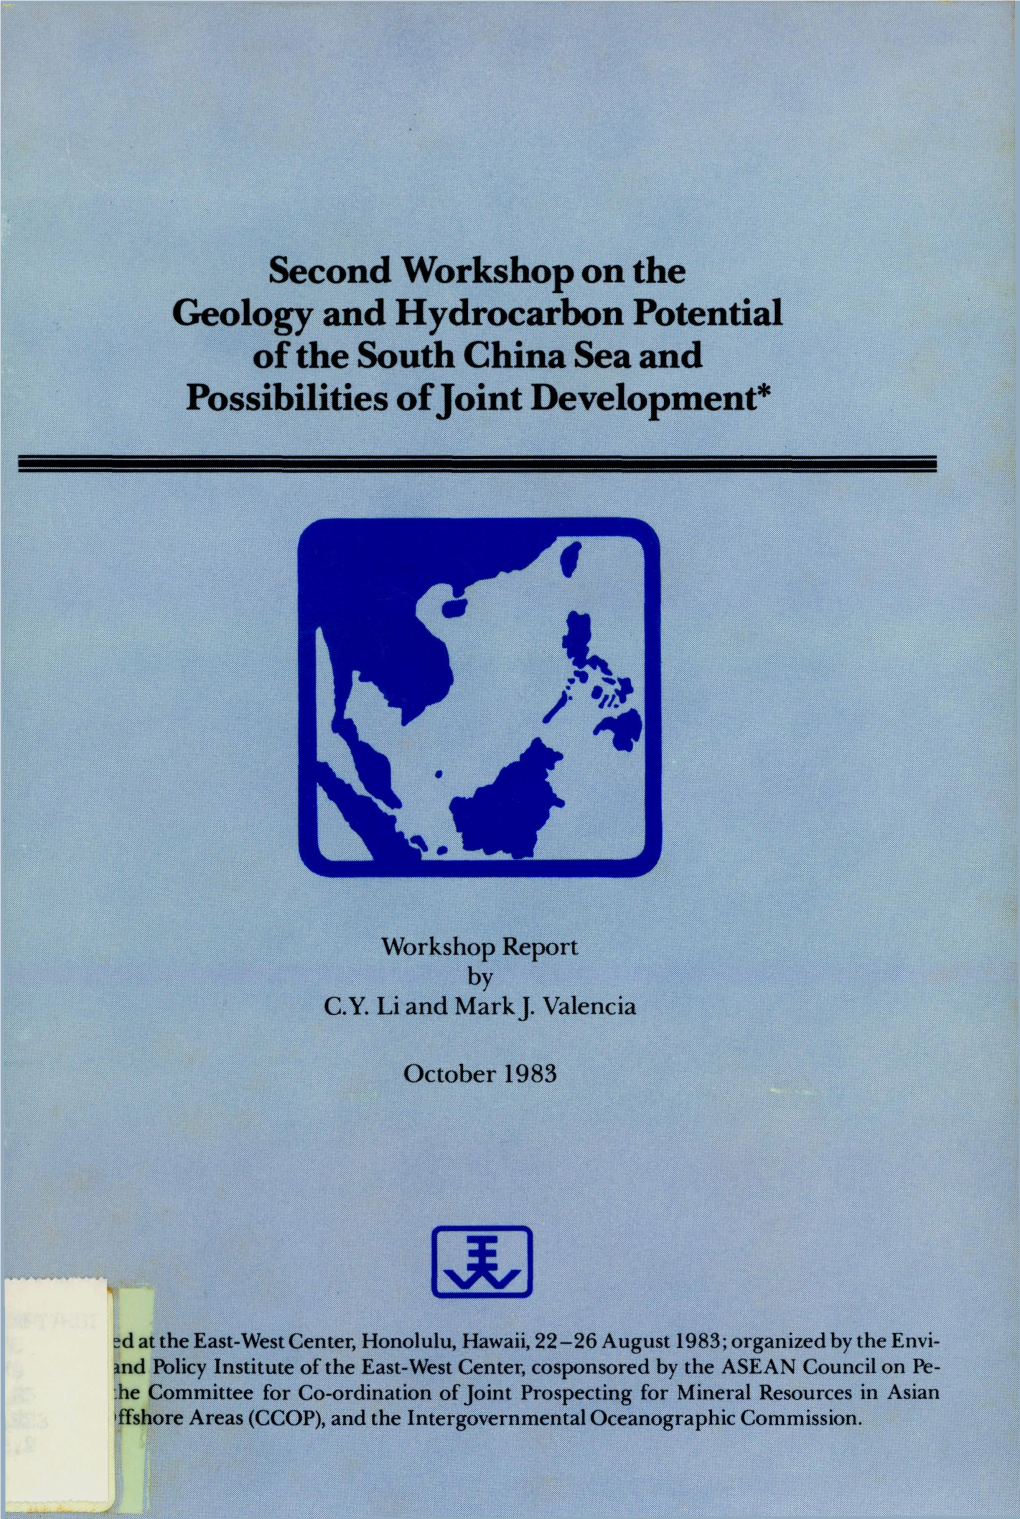 Second Workshop on the Geology and Hydrocarbon Potential of the South China Sea and Possibilities of Joint Development*